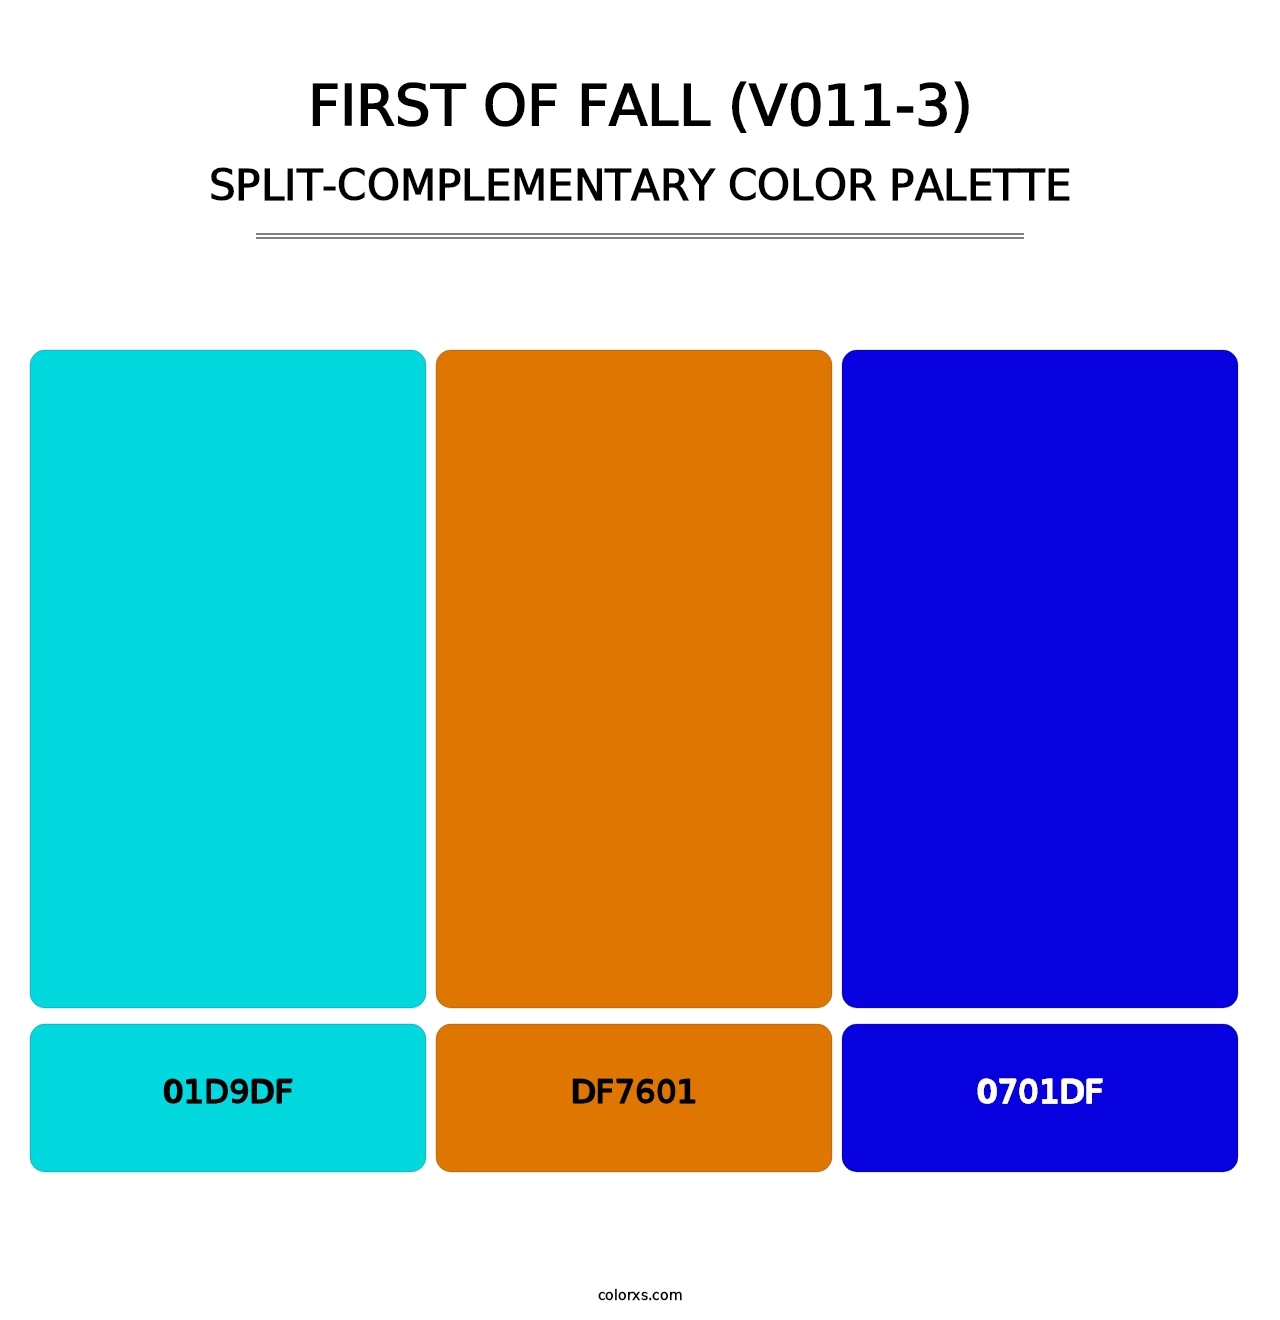 First of Fall (V011-3) - Split-Complementary Color Palette